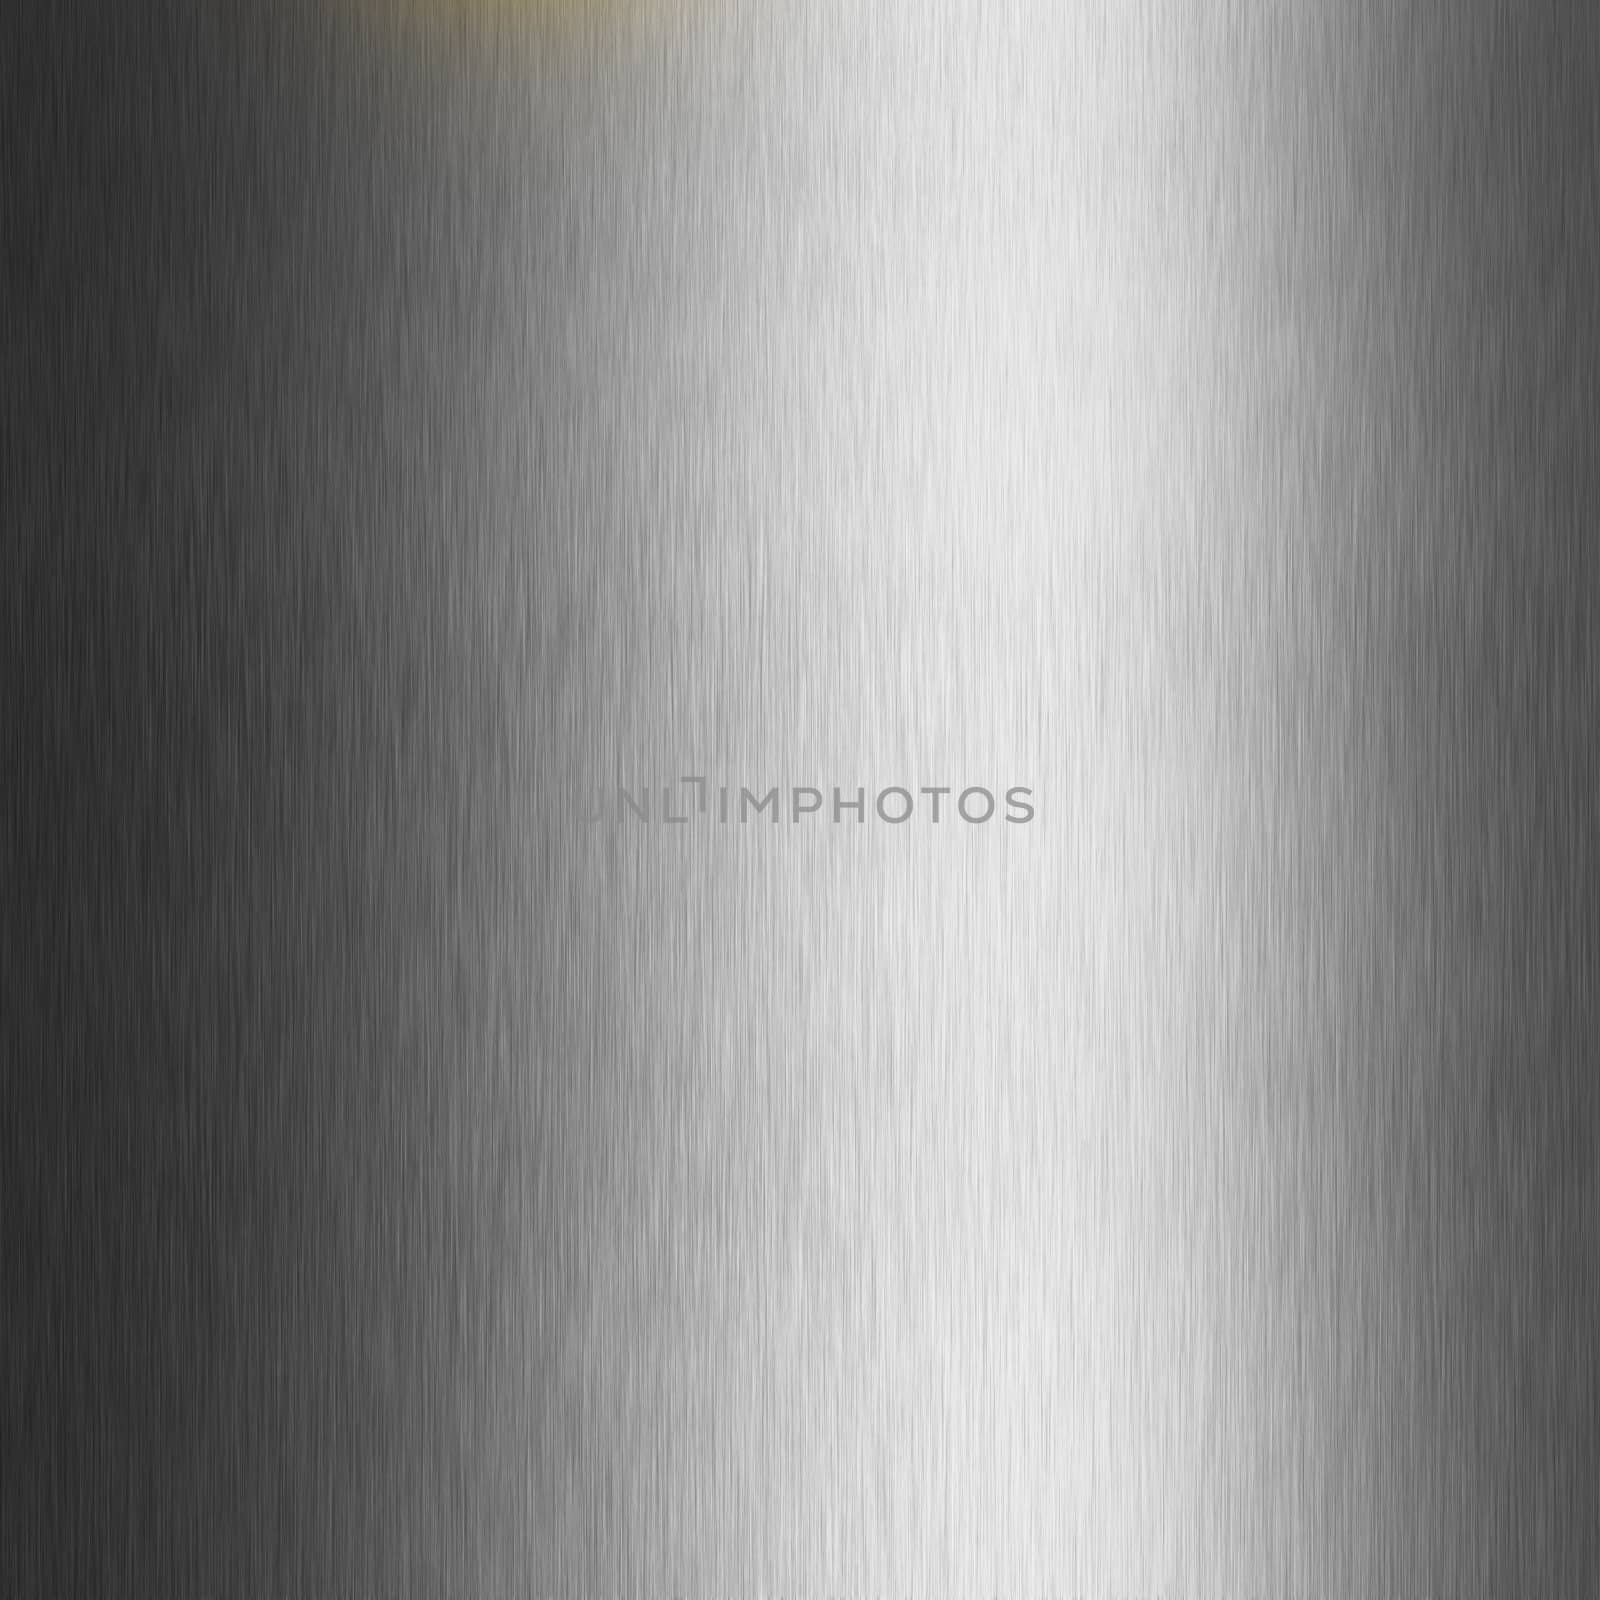 Brushed metal texture abstract background by jeremywhat